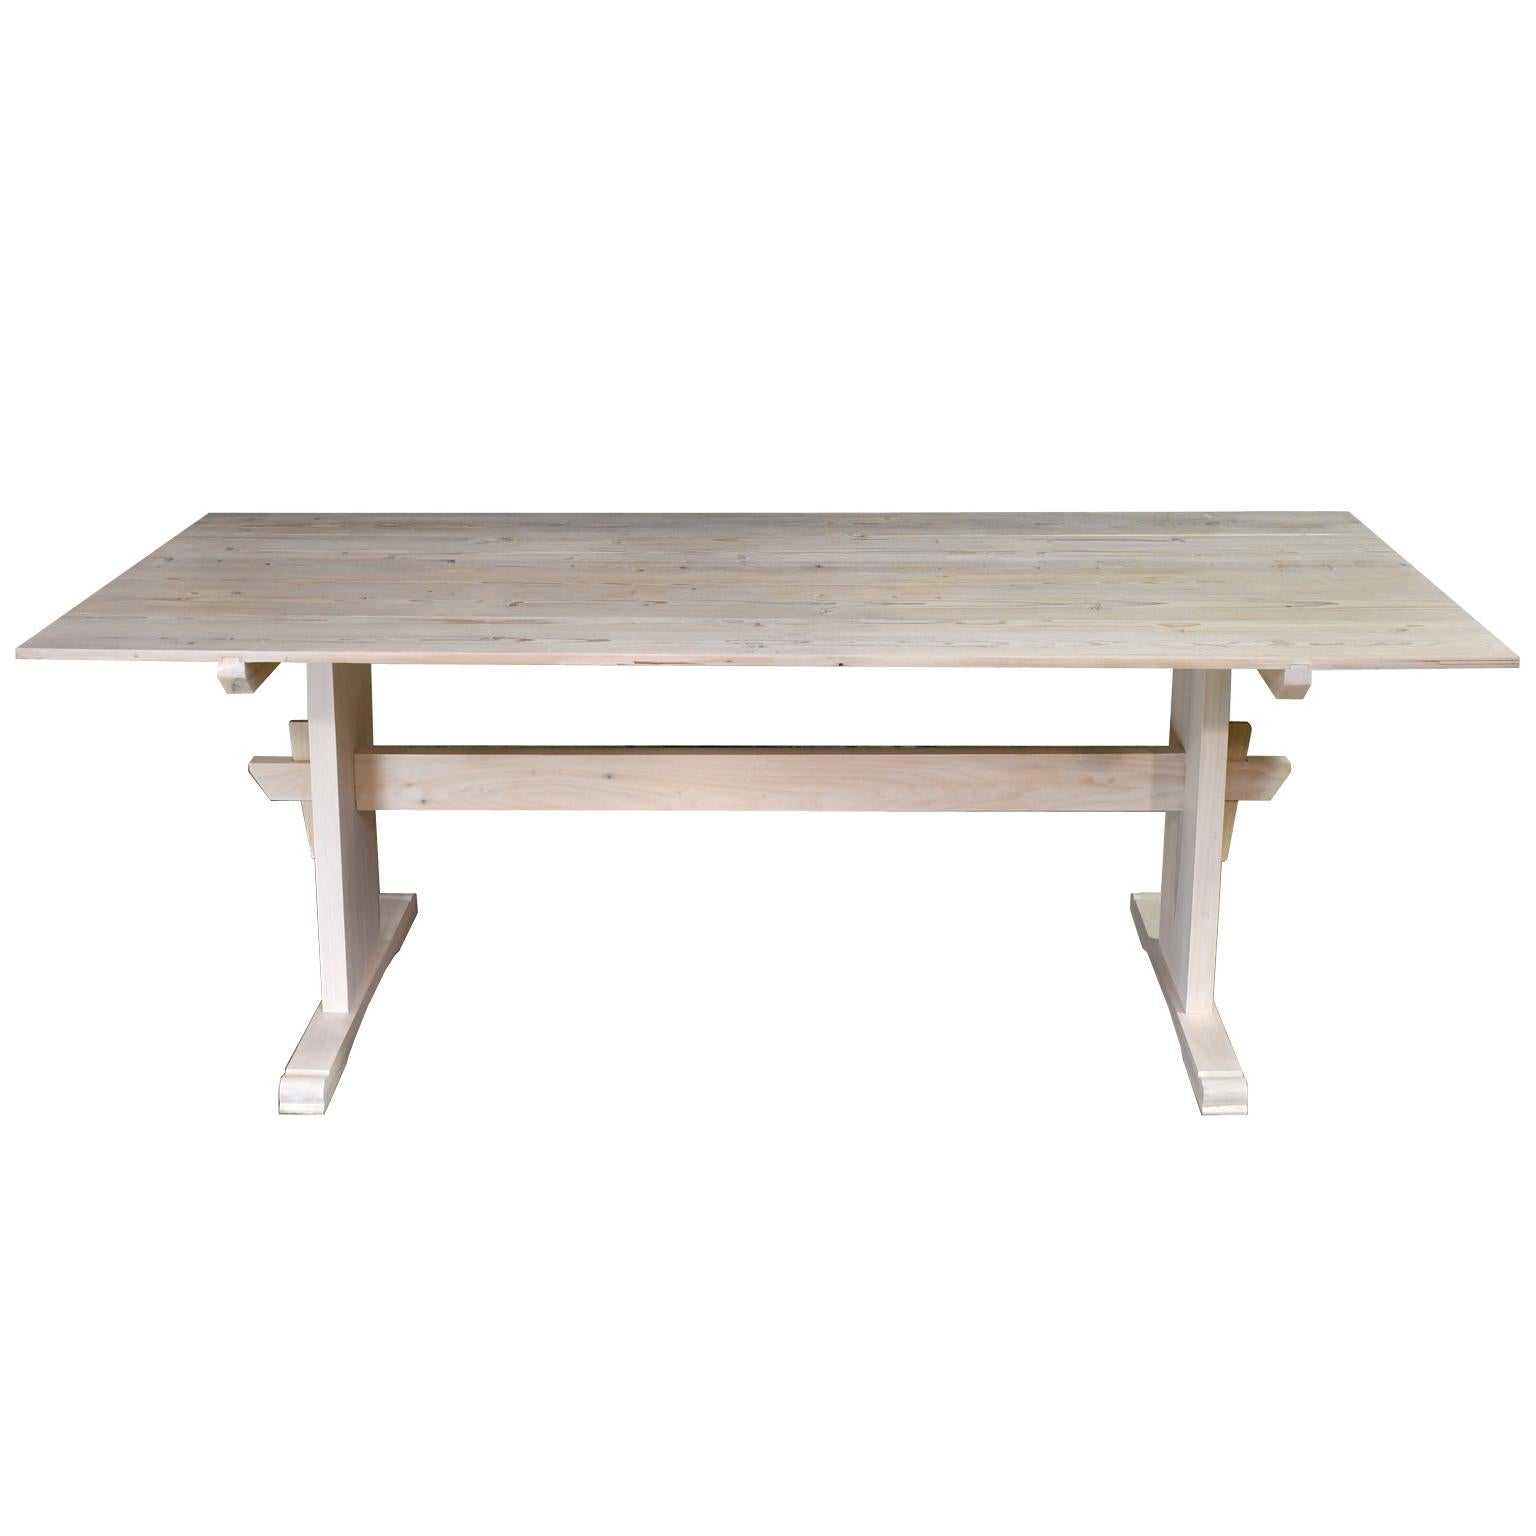 A Bonnin Ashley custom made, dining table with plank-top and trestle base made from repurposed European pine. We can manufacture this Scandinavian-inspired table in any size up to 10' long. We offer a variety of trestle bases that will work with